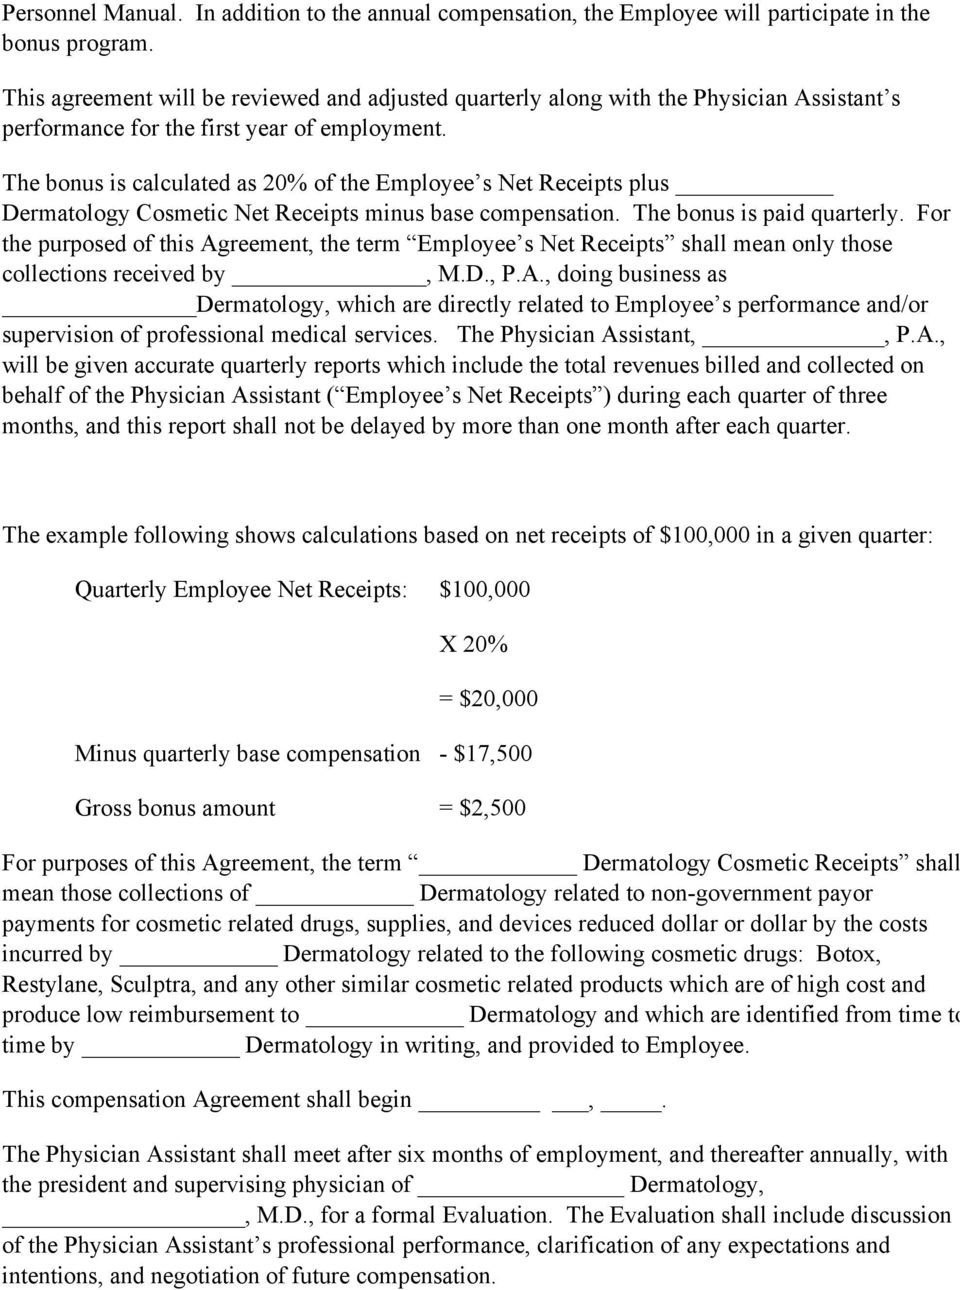 Performance Bonus Agreement Physician Assistant Employment Agreement Terms Of Agreement Pdf